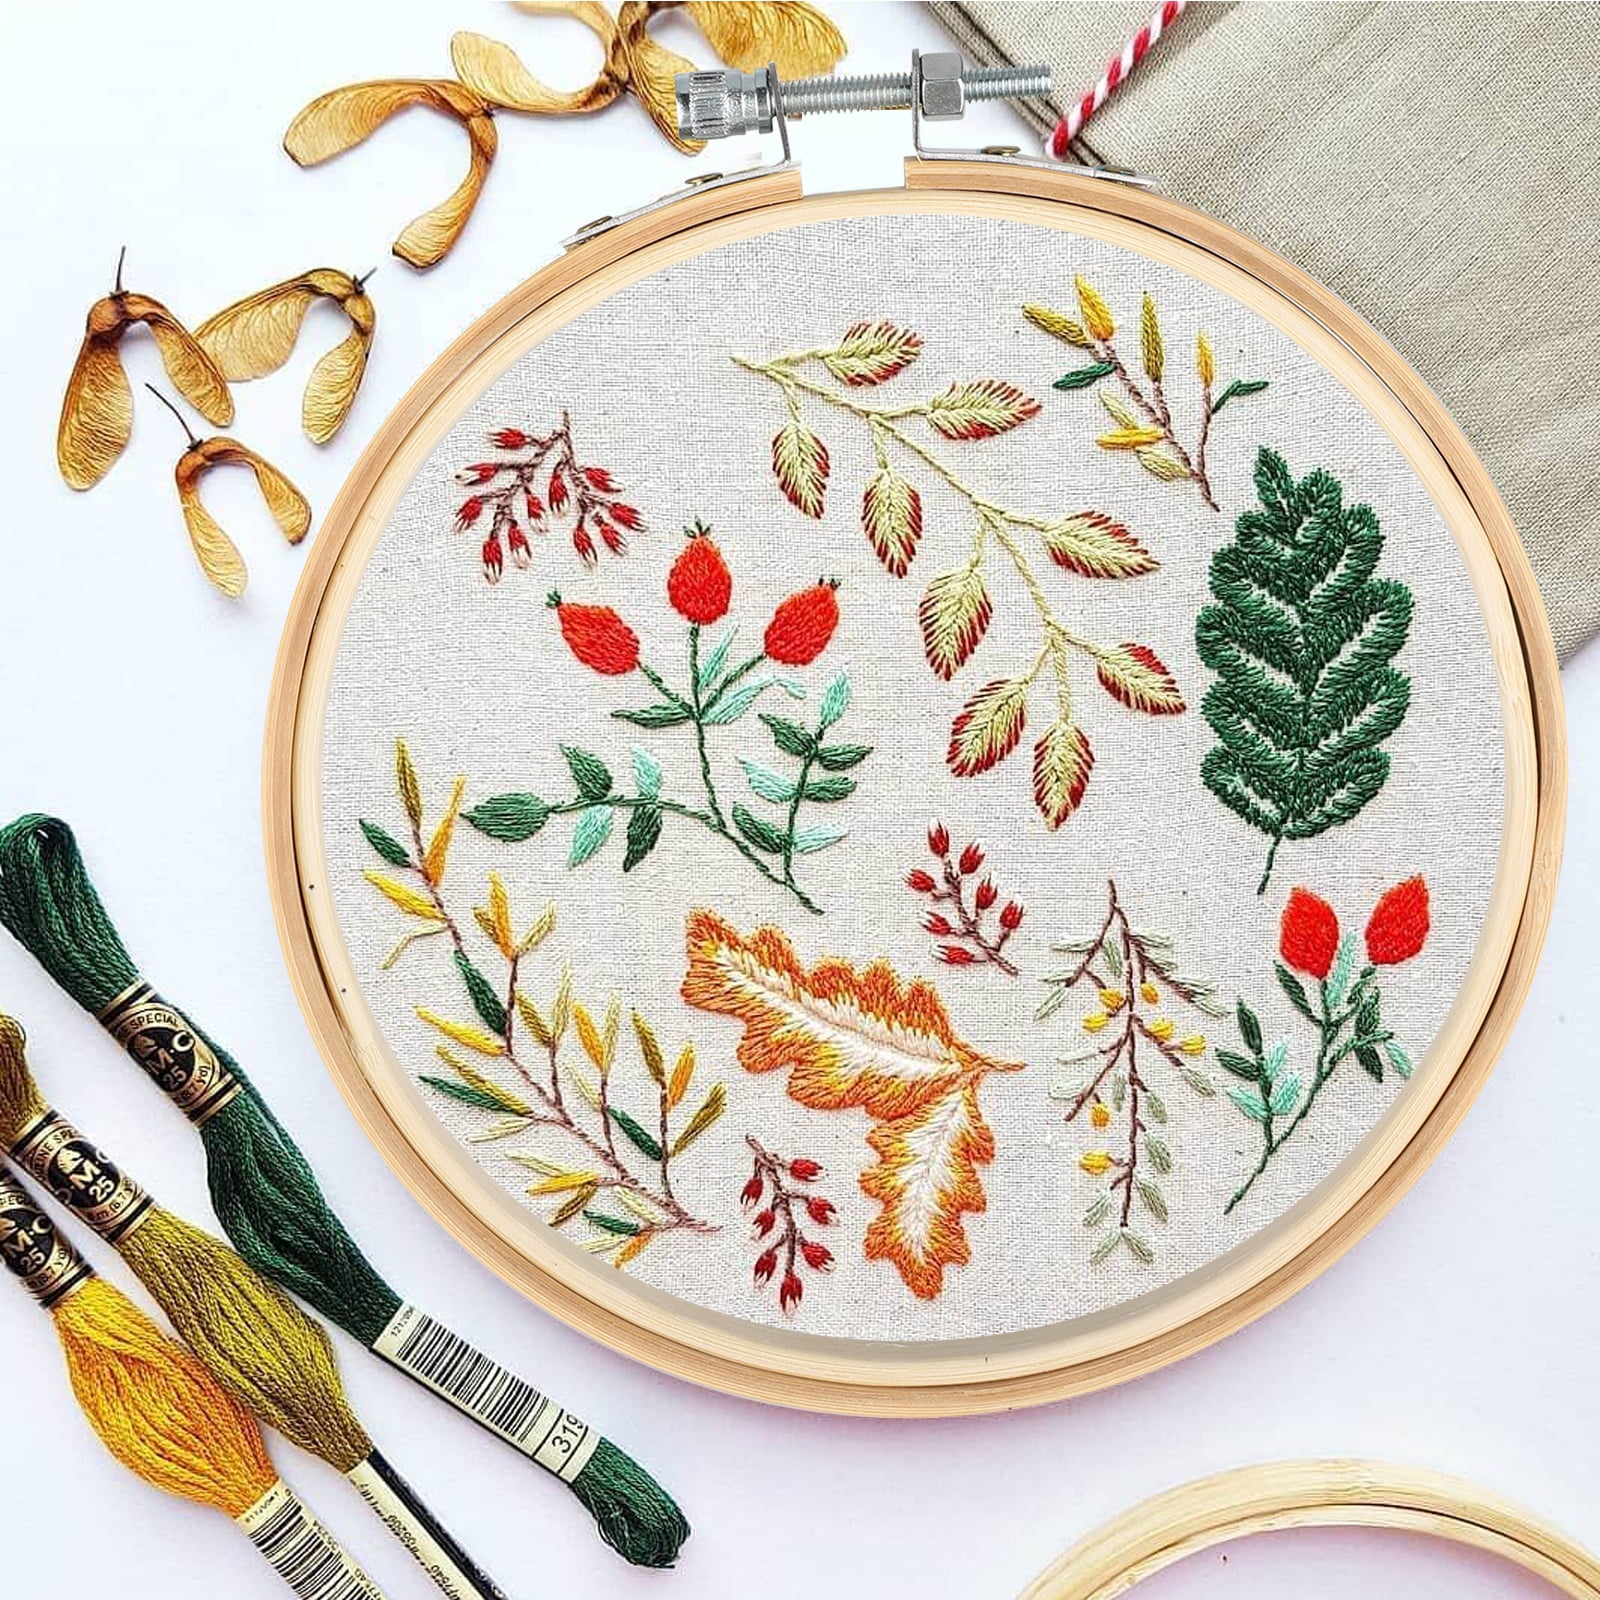  Tigeen 90 Pcs Embroidery Hoop Set 3 Size Bamboo Circle Cross  Stitch Hoop Ring Hoops for Crafts 3 Inch to 6 Inch Embroidery Hoop Frame  for Embroidery Cross Stitch Sewing Quilting Knitting Supplies